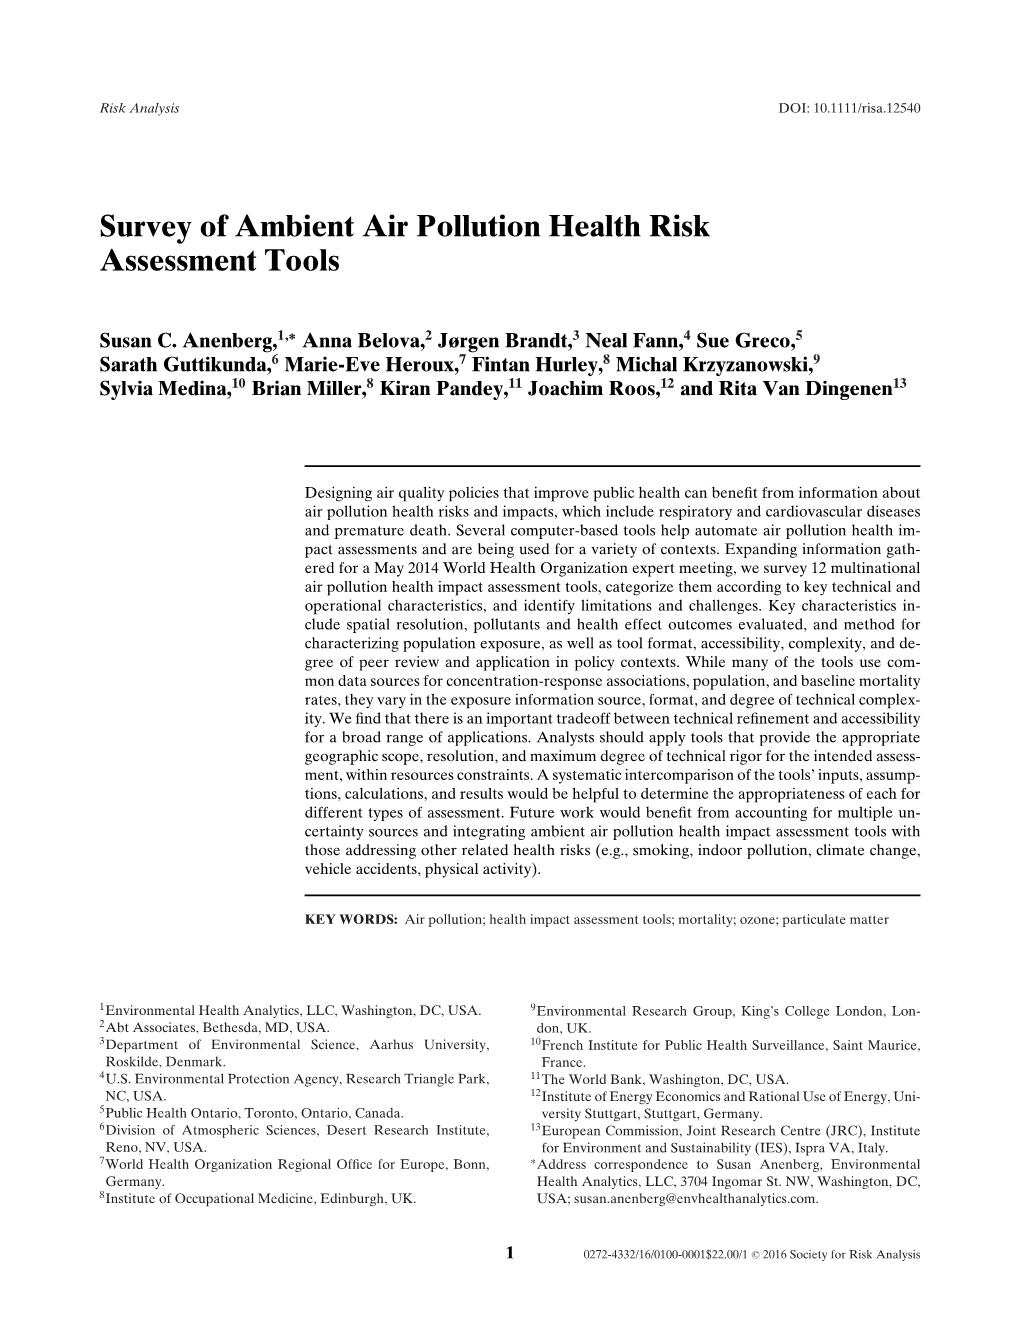 Survey of Ambient Air Pollution Health Risk Assessment Tools